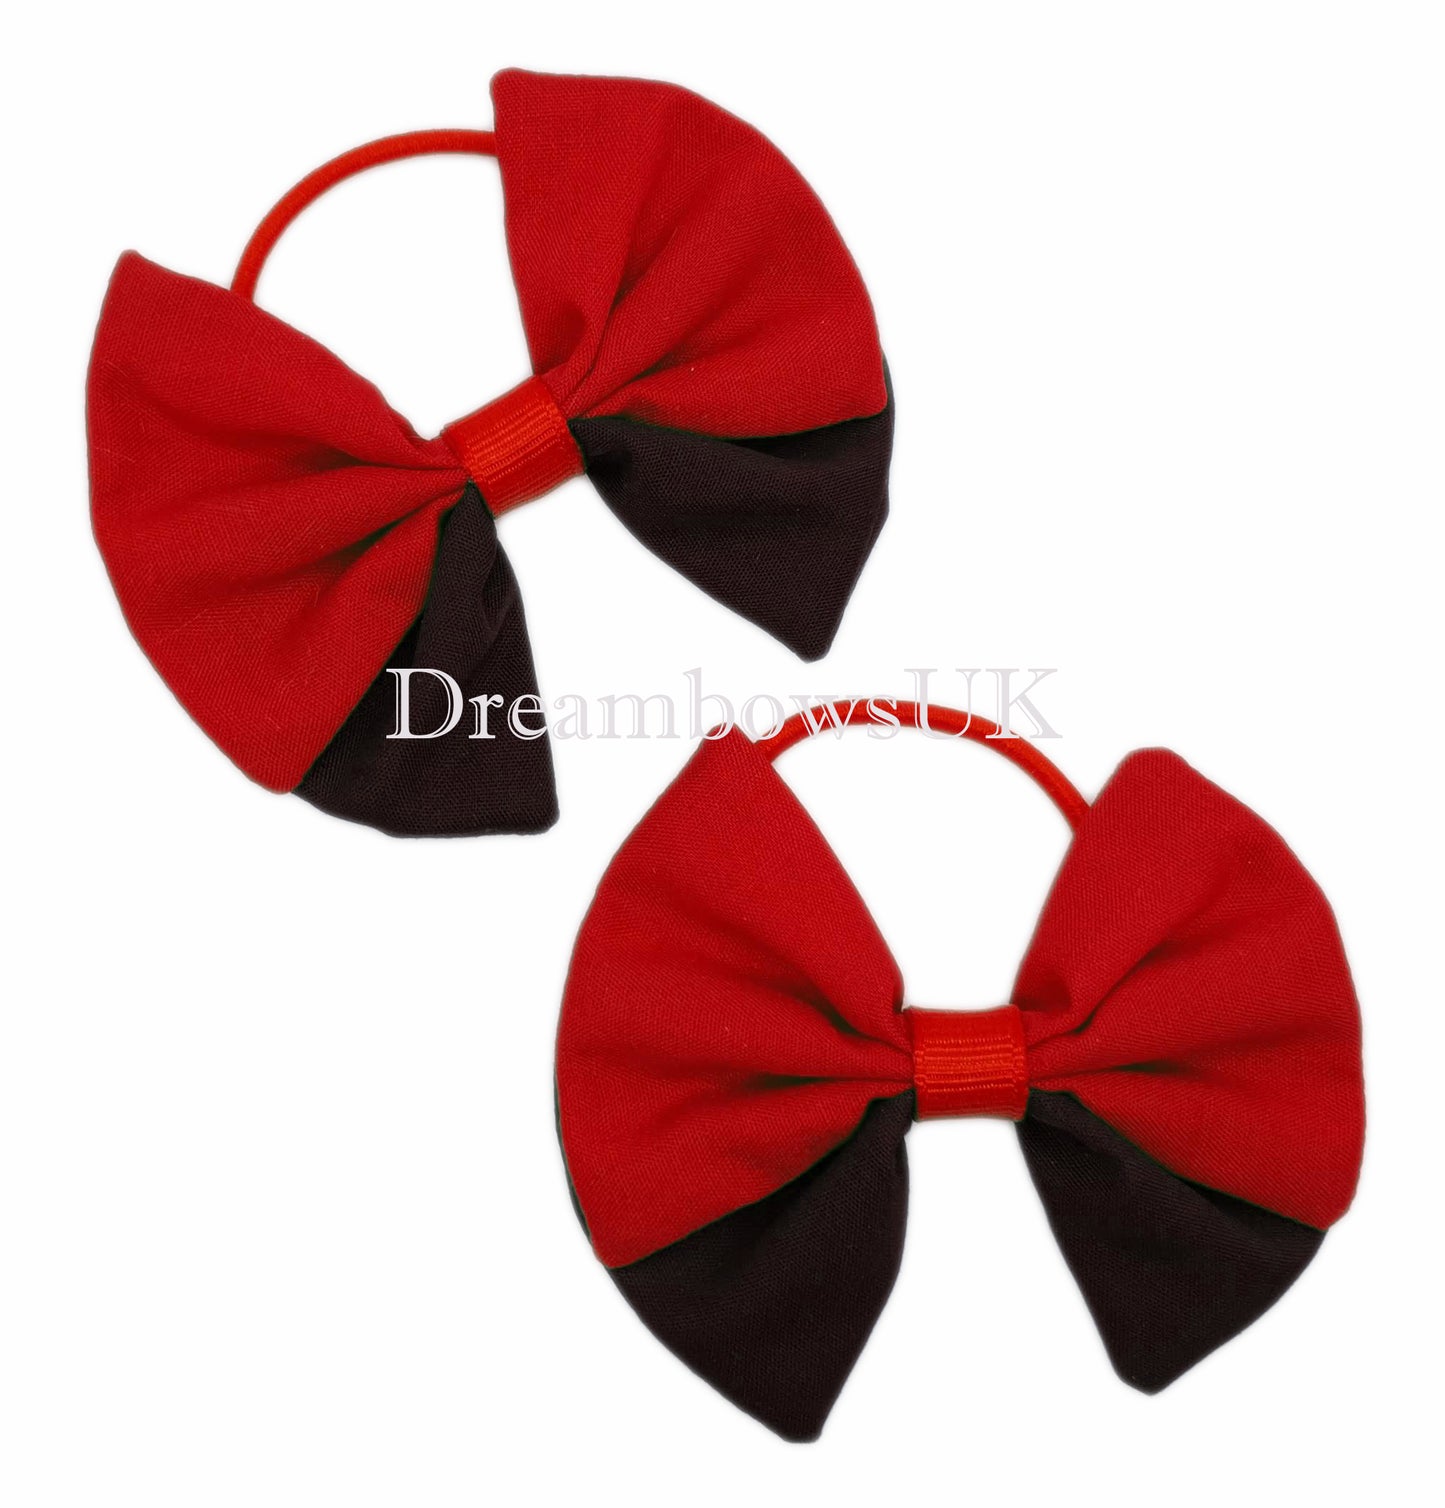 2x Black and red fabric hair bows